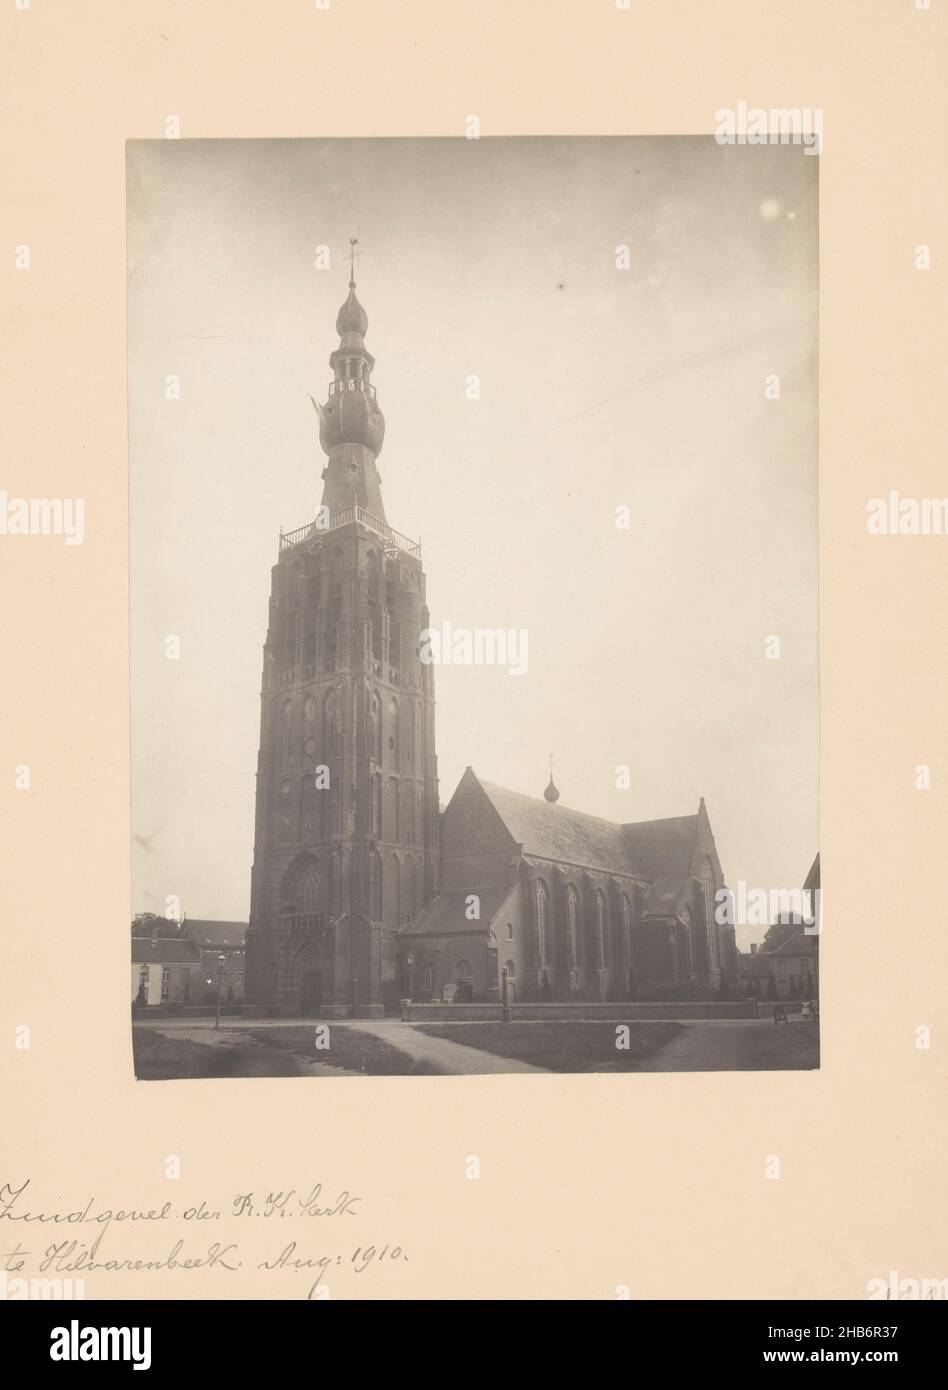 View of the Saint Peter's Church in Hilvarenbeek, anoniem (Monumentenzorg) (attributed to), Hilvarenbeek, 1910, photographic support, cardboard, gelatin silver print, height 218 mm × width 159 mm Stock Photo